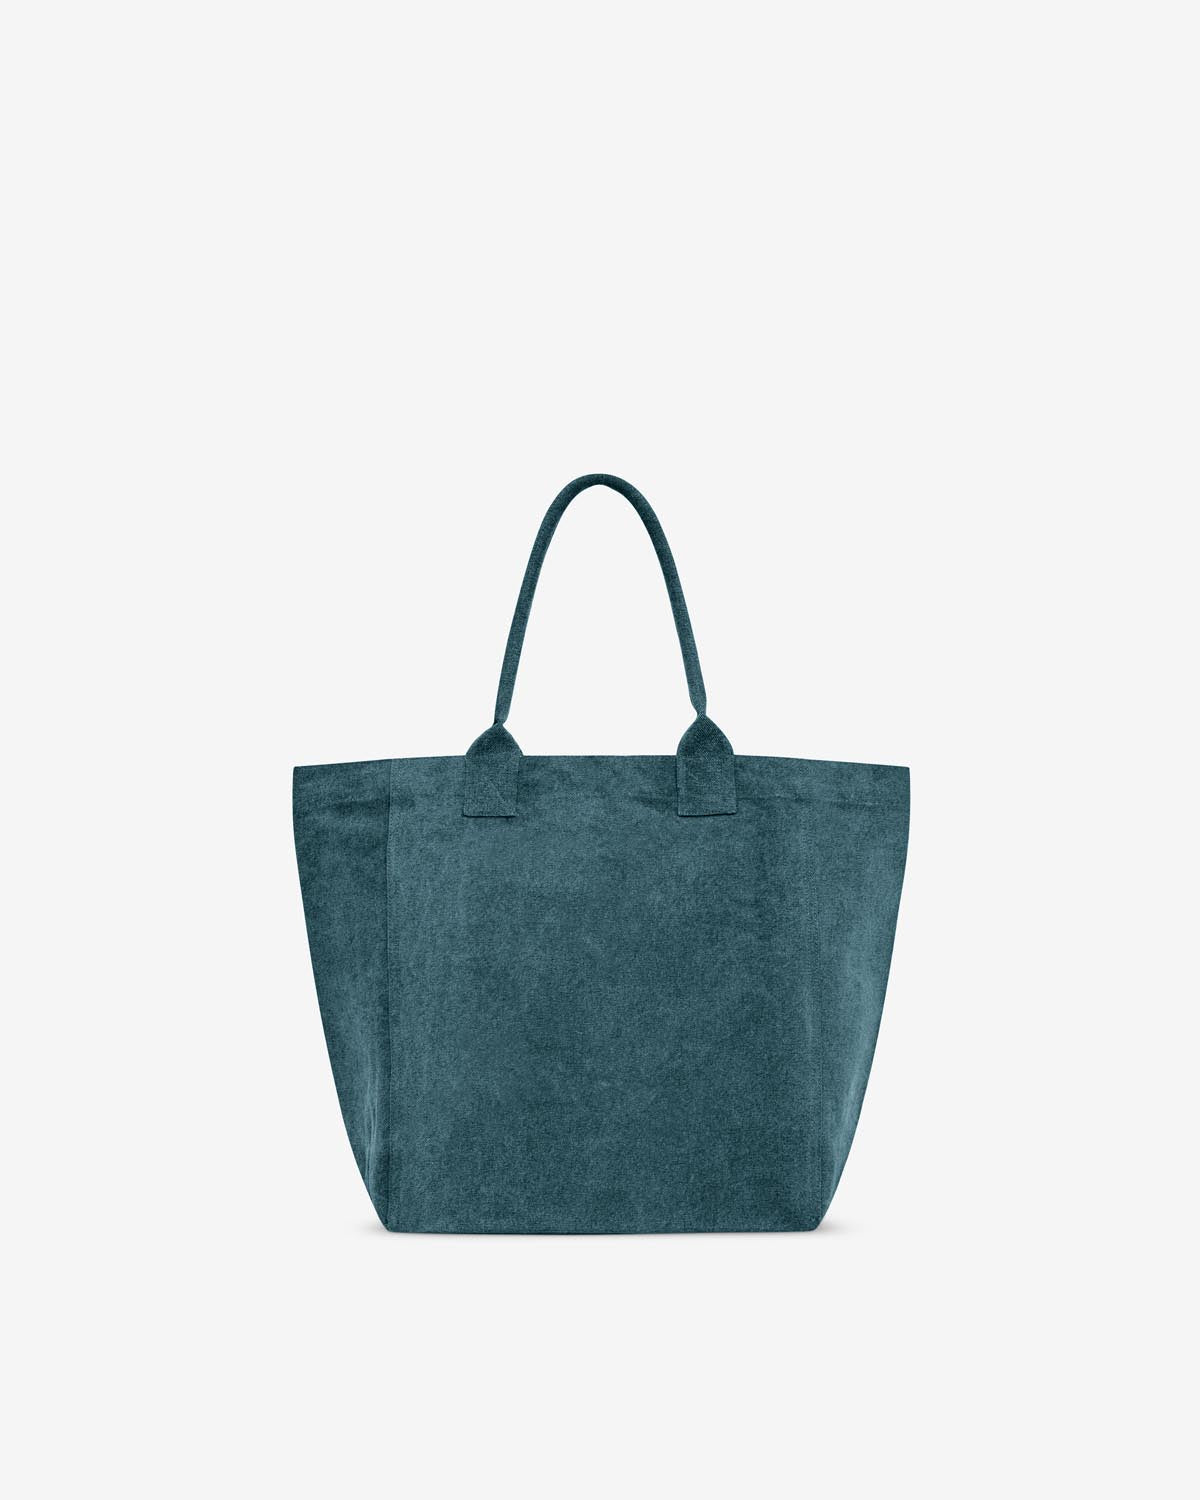 Bolso tote yenky Woman Verde oscuro 2